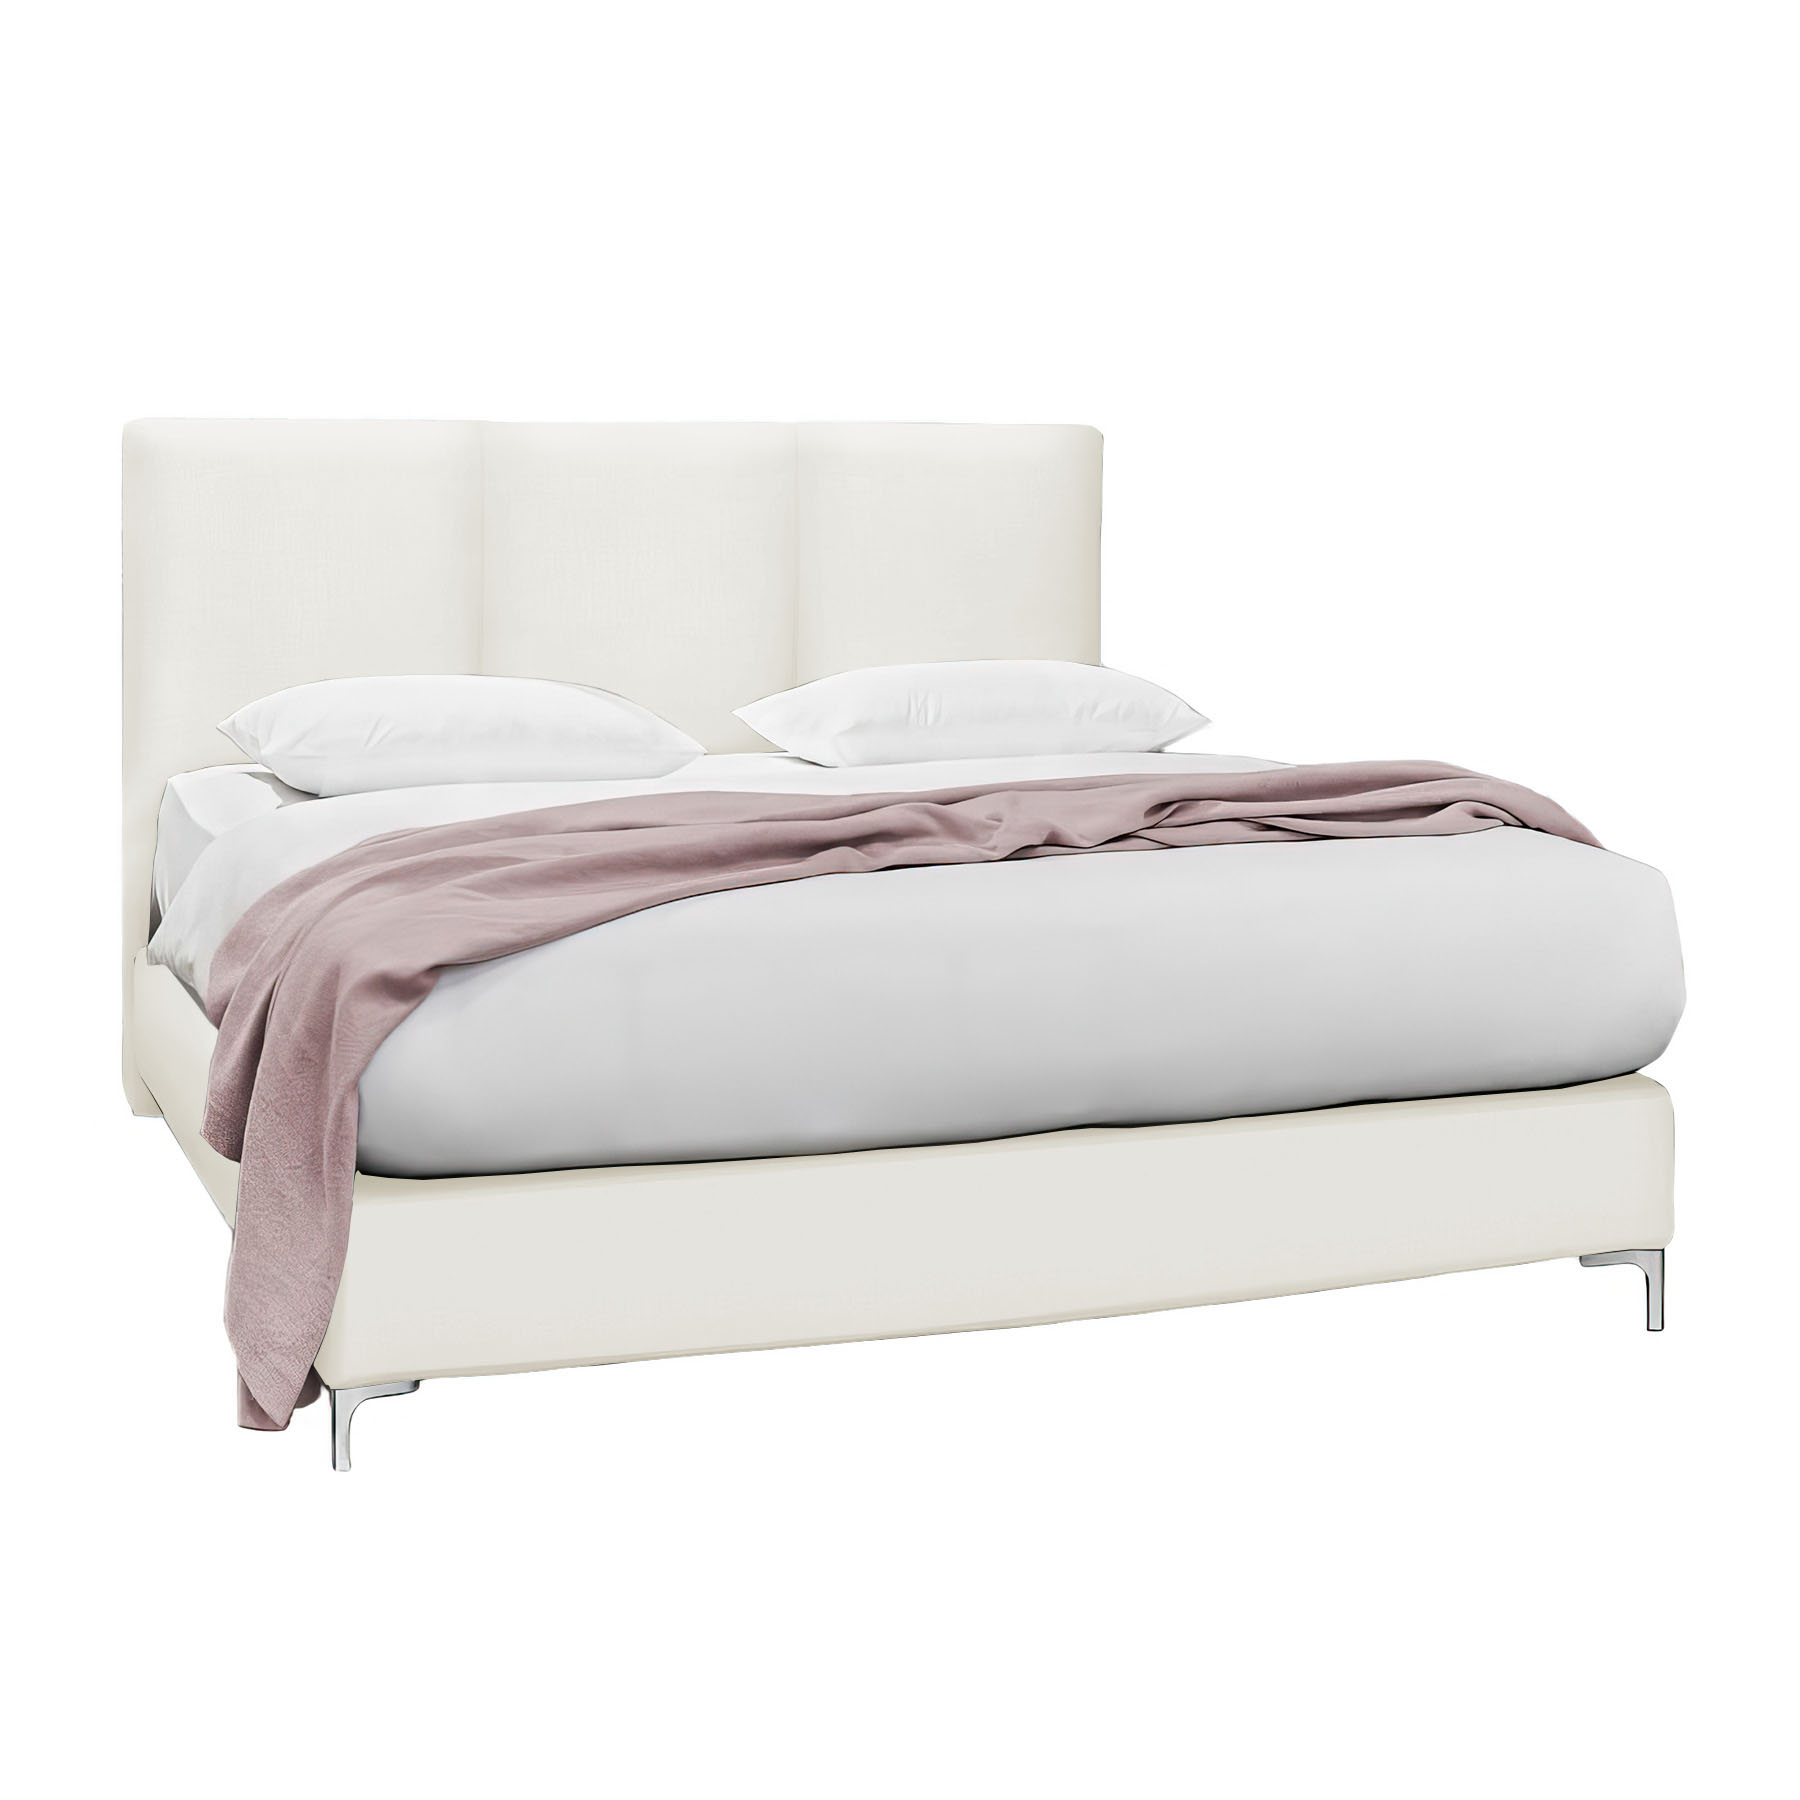 Boxspringbett Kate Select 160/200cm in Hot Madison Wollweiß